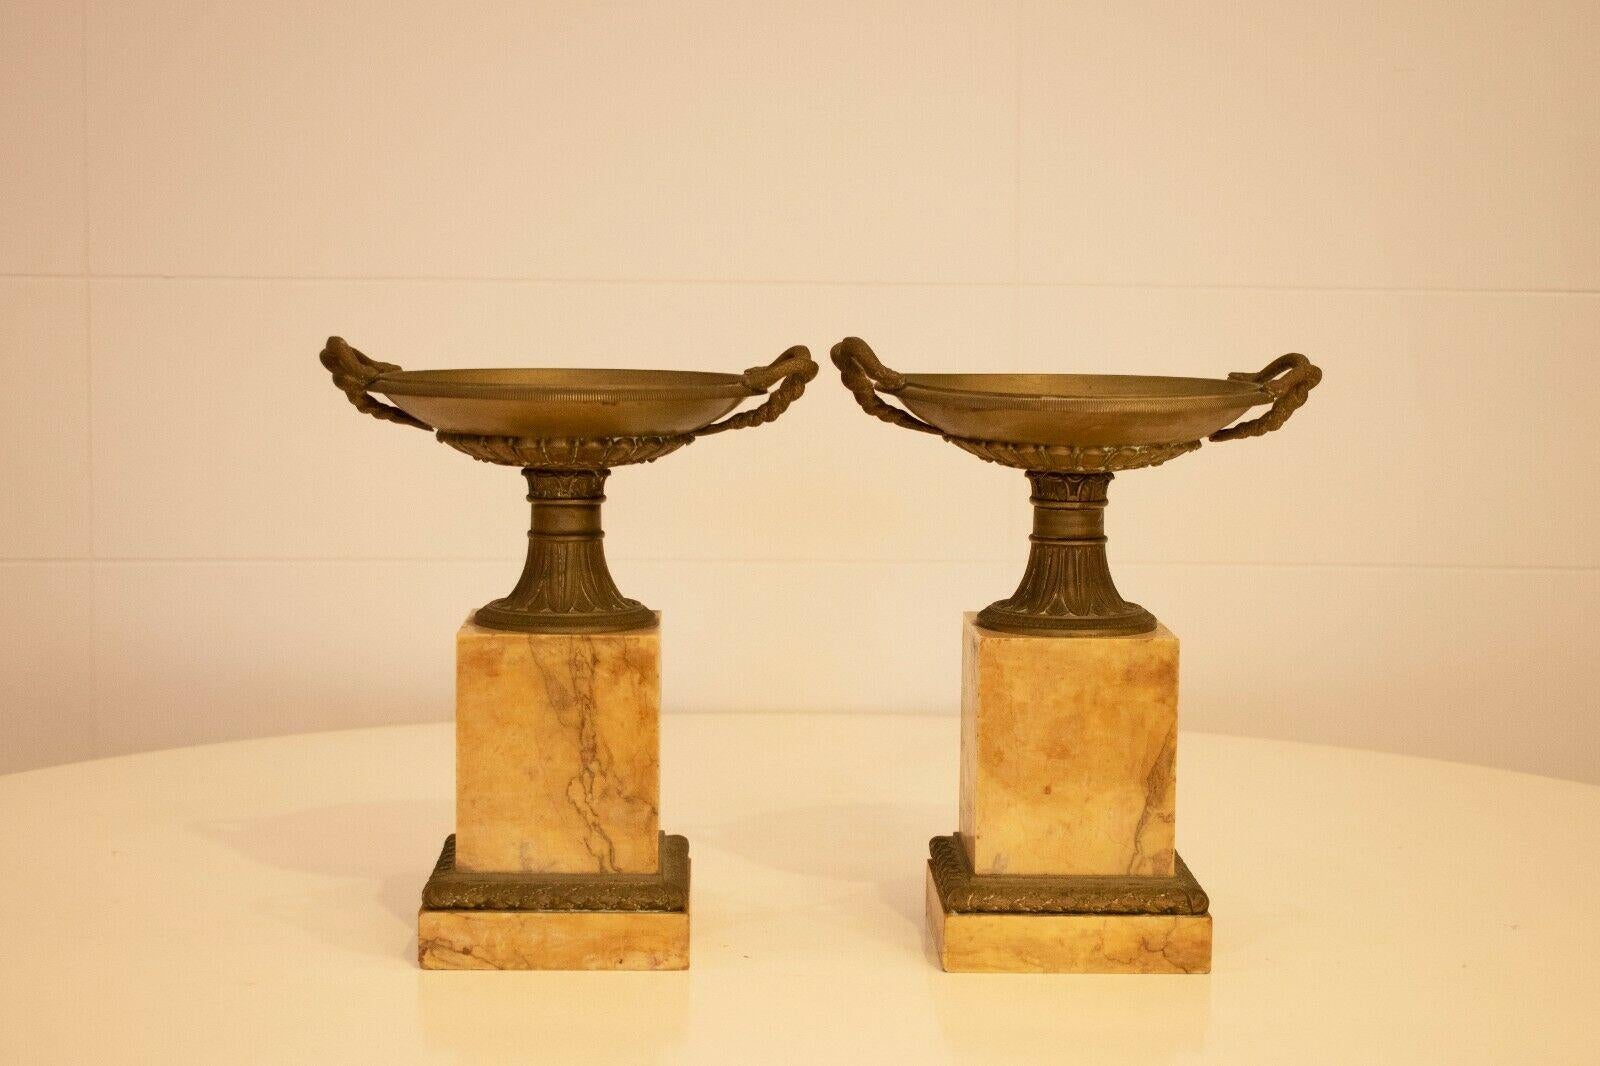 19th century pair of grand tour marble and bronze tazza, of neo-classical design.

Set upon a grand Sienna with marble base, with finely chased lappet cast mounts over a stepped base.

The bronze classical shaped shallows urns feature serpent